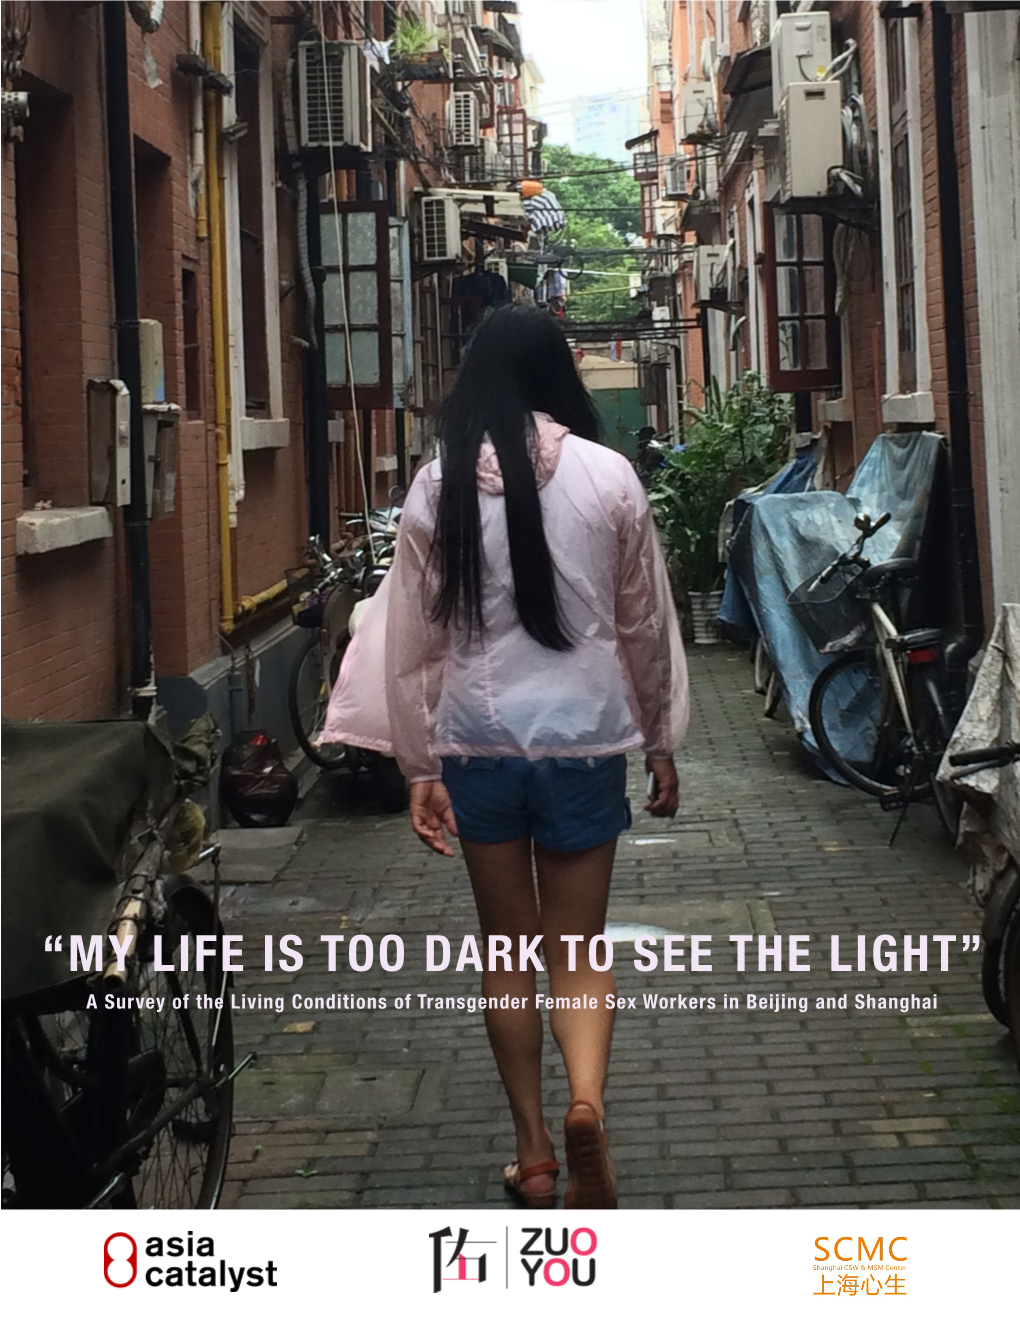 “MY LIFE IS TOO DARK to SEE the LIGHT” a Survey of the Living Conditions of Transgender Female Sex Workers in Beijing and Shanghai